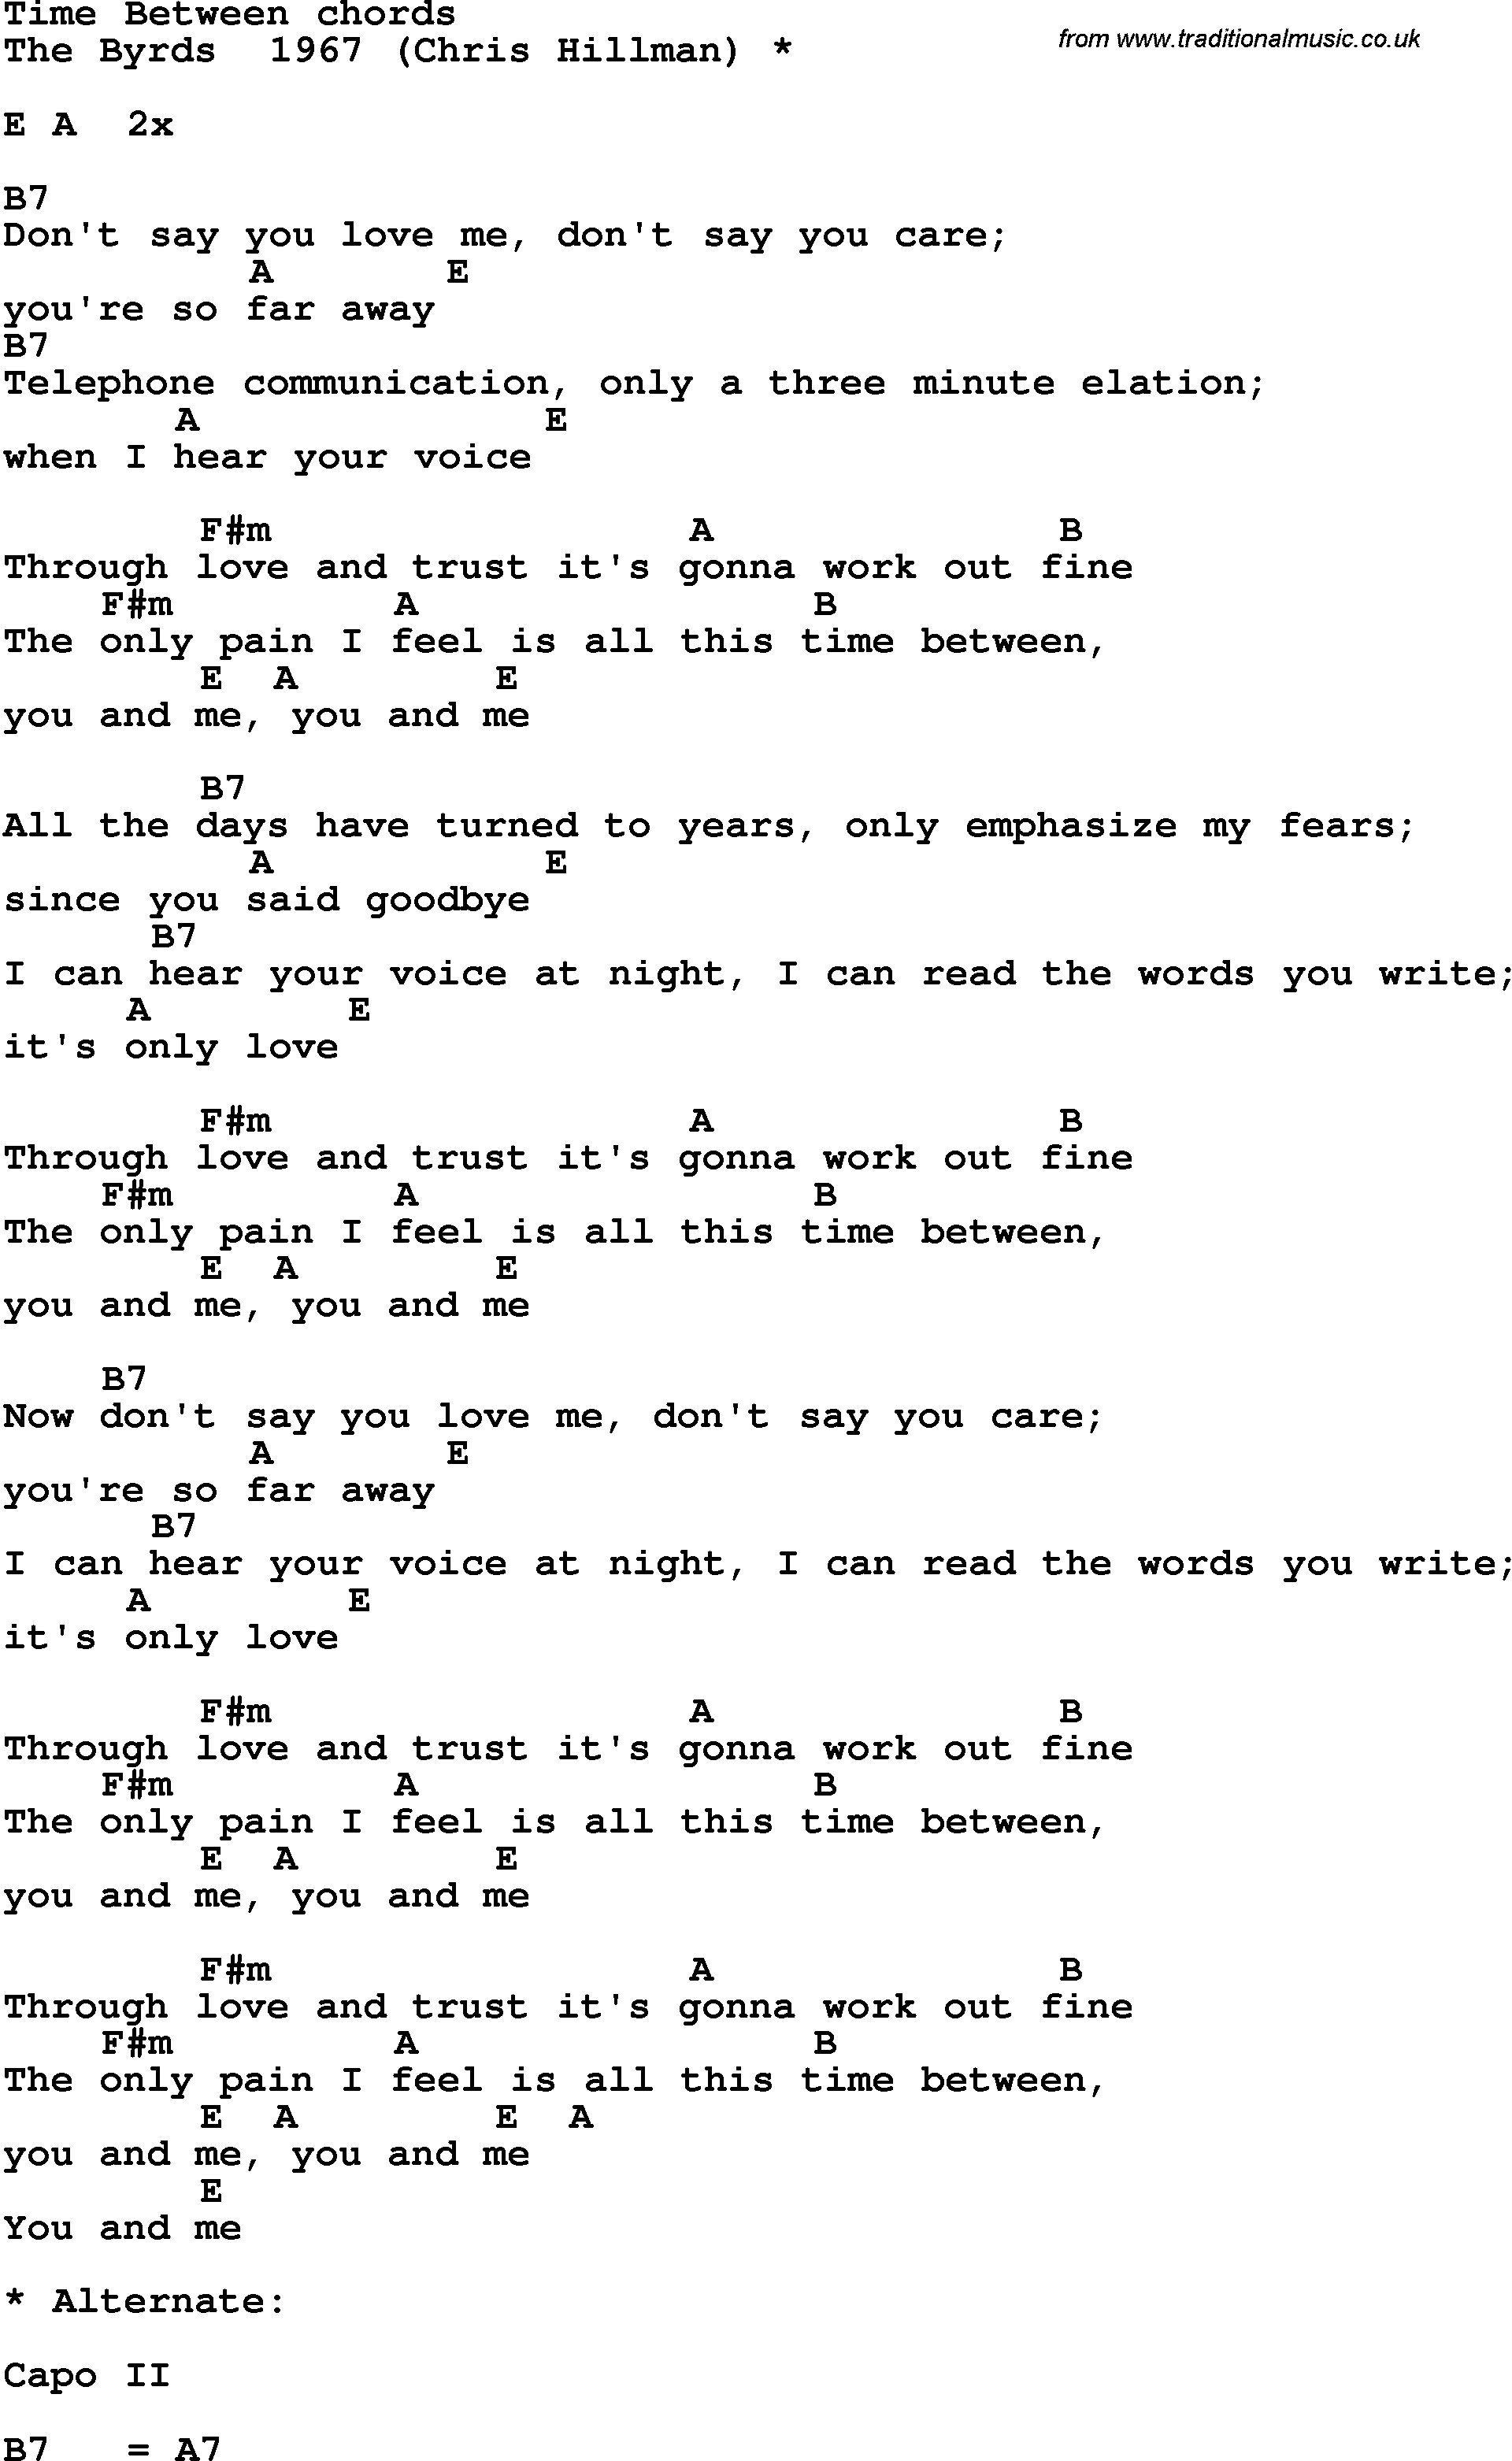 Song Lyrics with guitar chords for Time Between